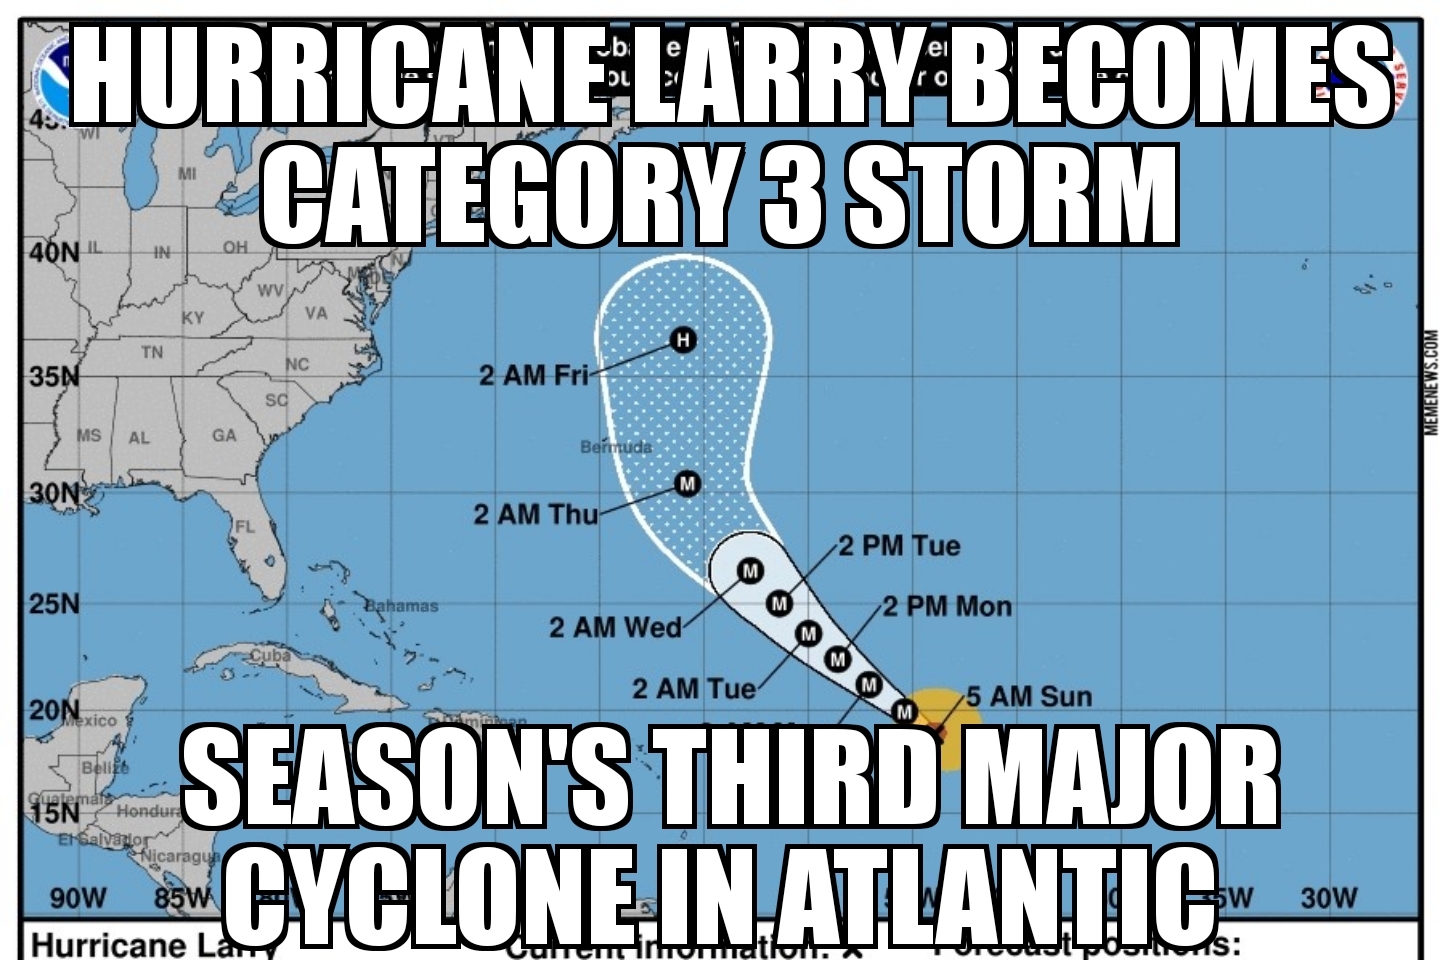 Hurricane Larry becomes category 3